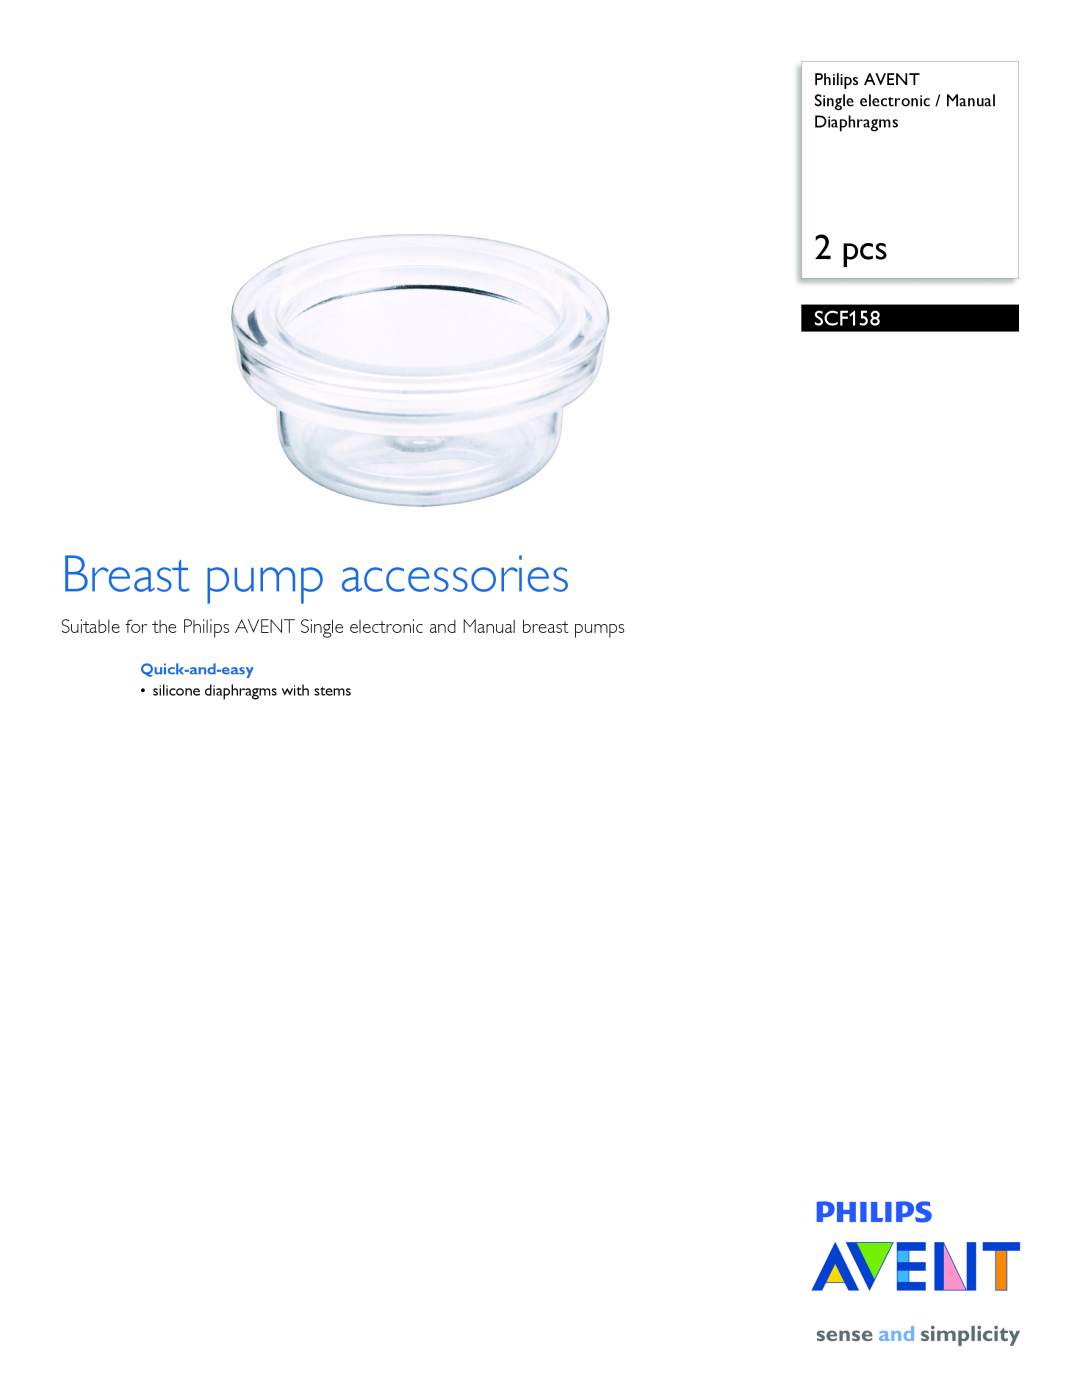 Philips SCF158 manual Philips AVENT Single electronic / Manual Diaphragms, Quick-and-easy, Breast pump accessories, 2 pcs 